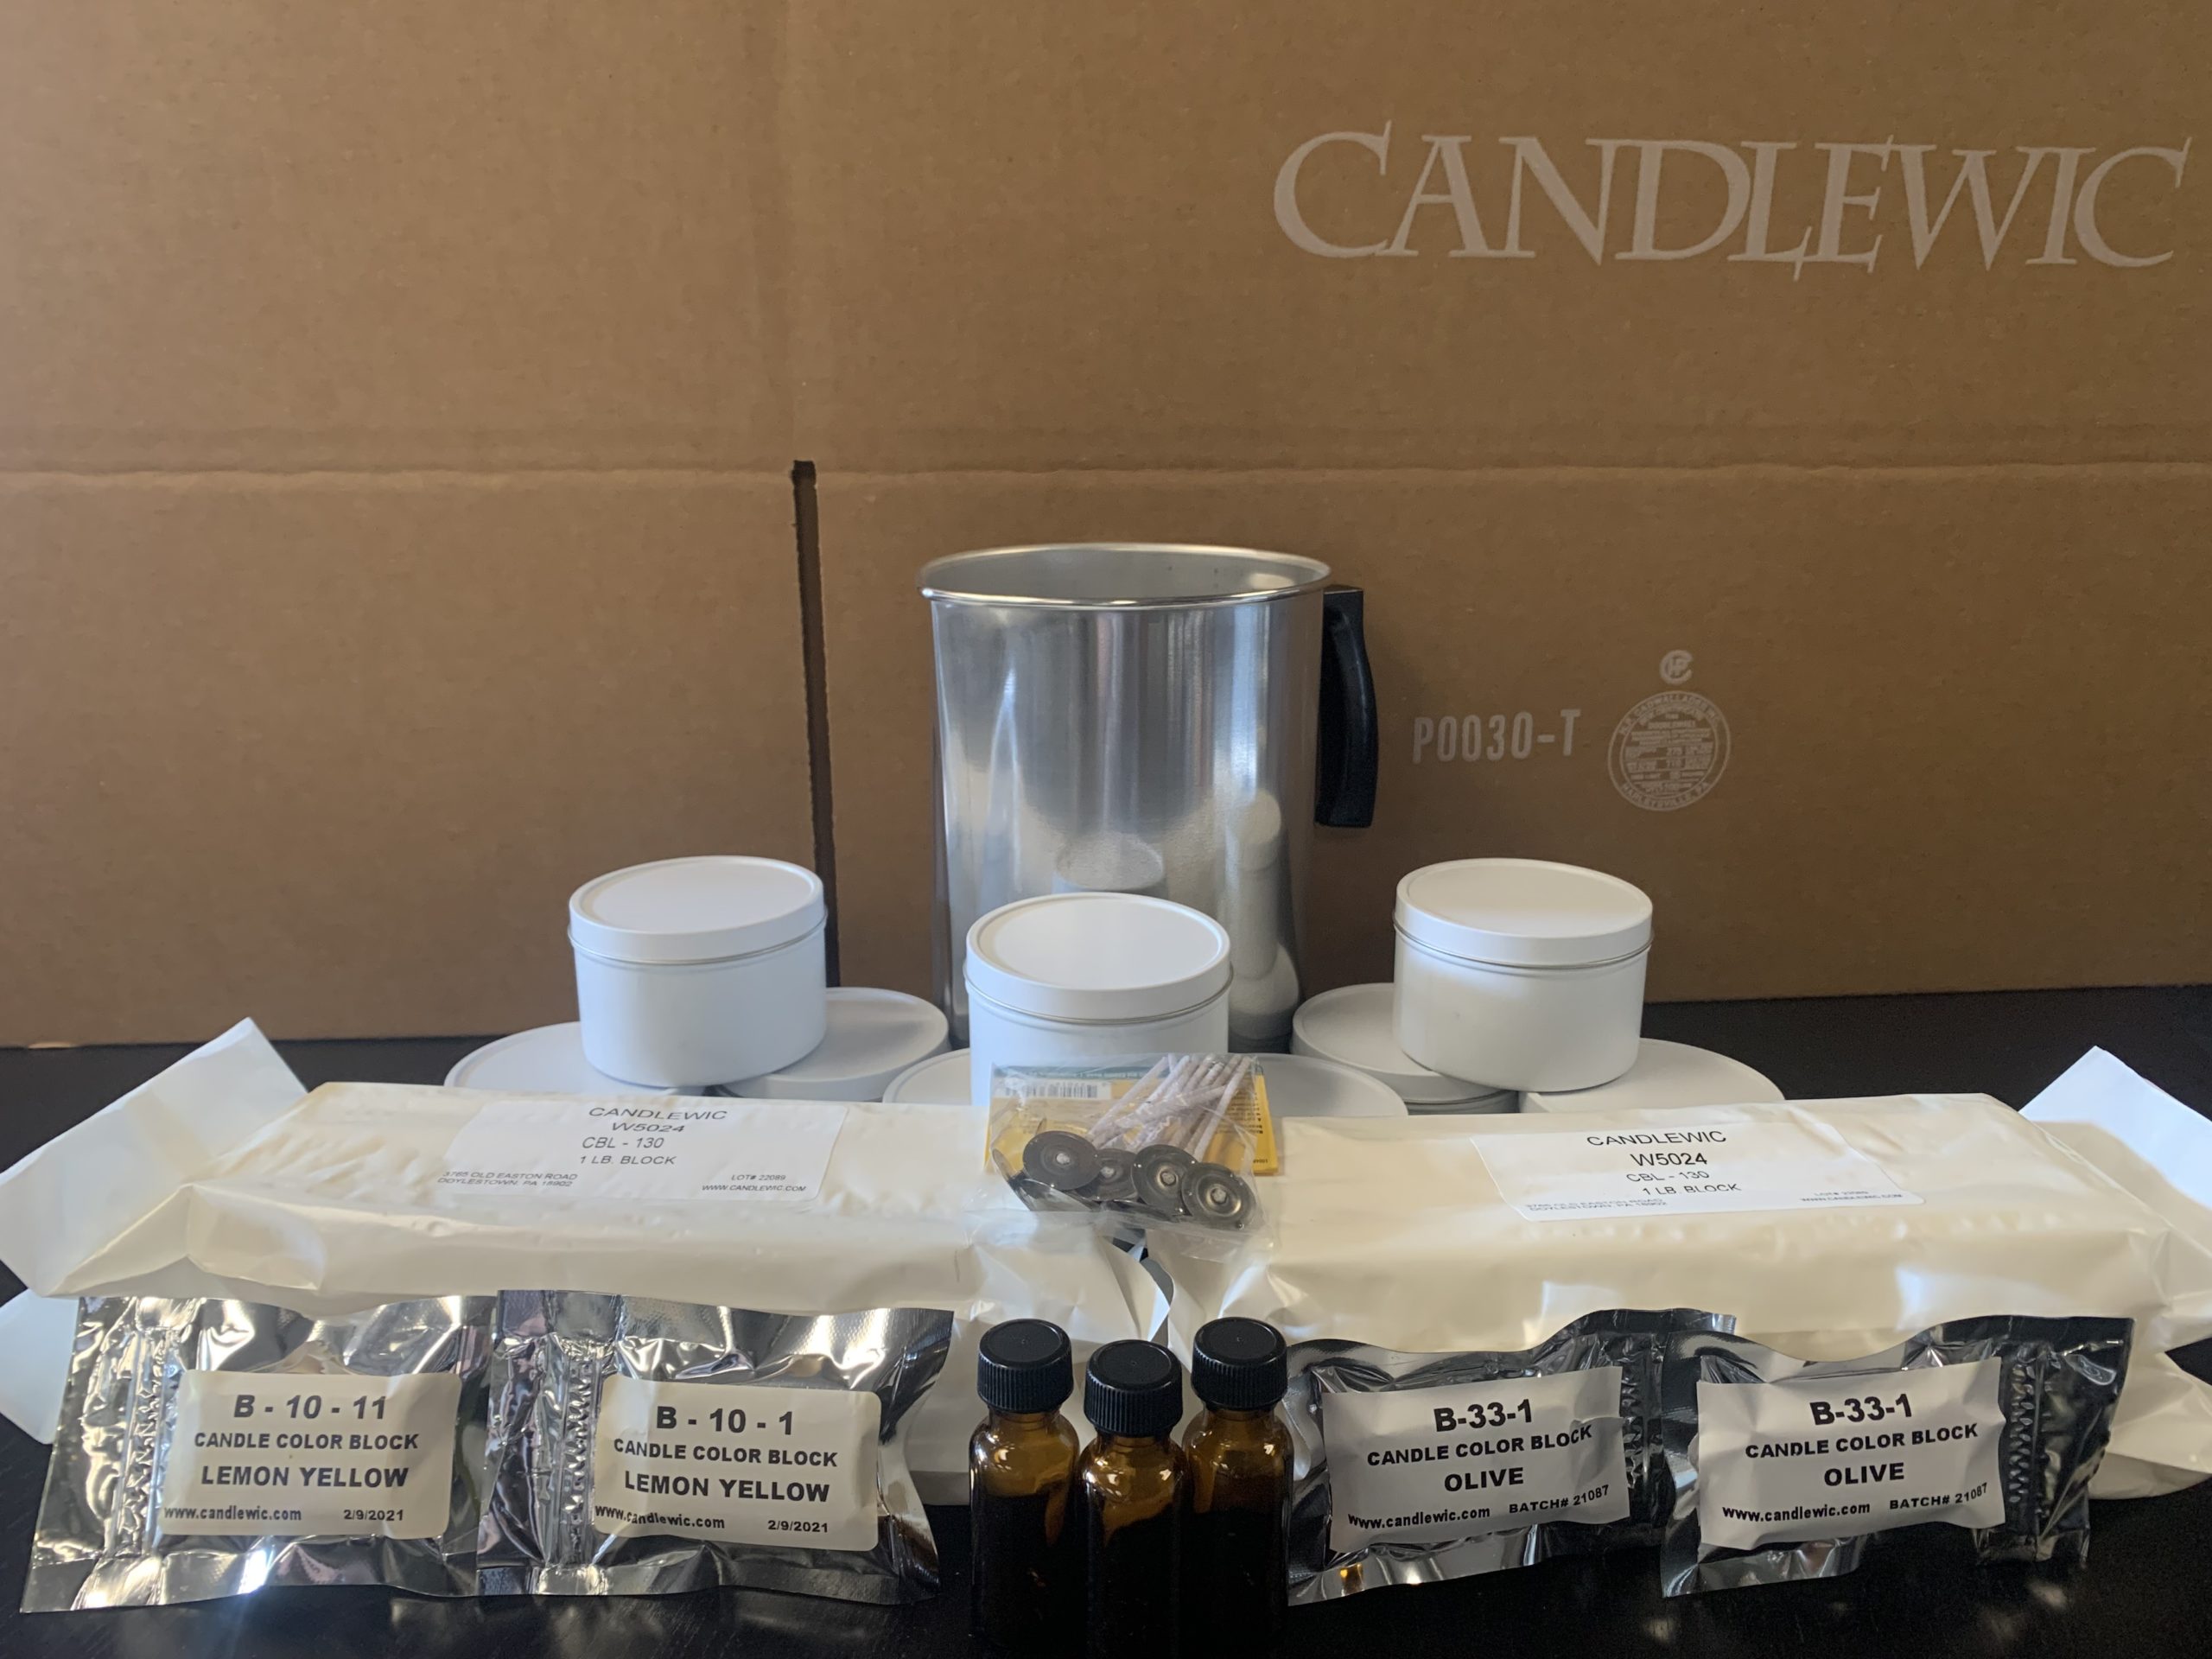 Candle Wax - DIY Candle Making Supplies with 15 LB Soy Wax for Candle Making  - Full Candle